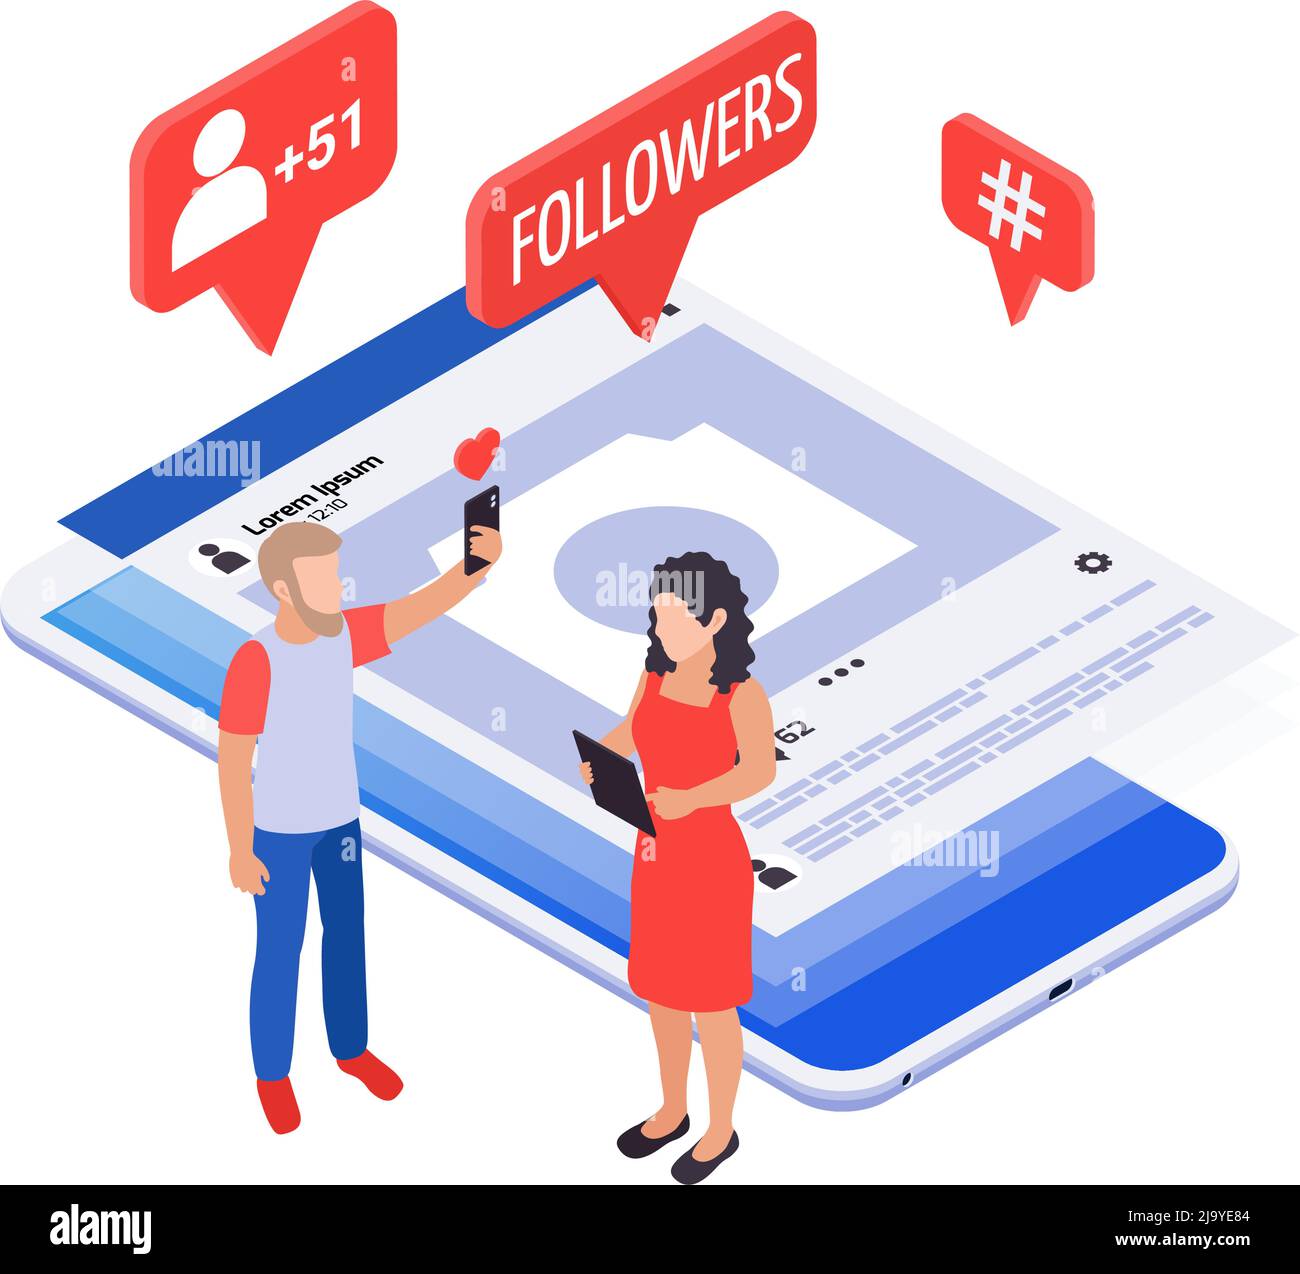 Social media isometric concept with notification icons smartphone and characters of followers vector illustration Stock Vector